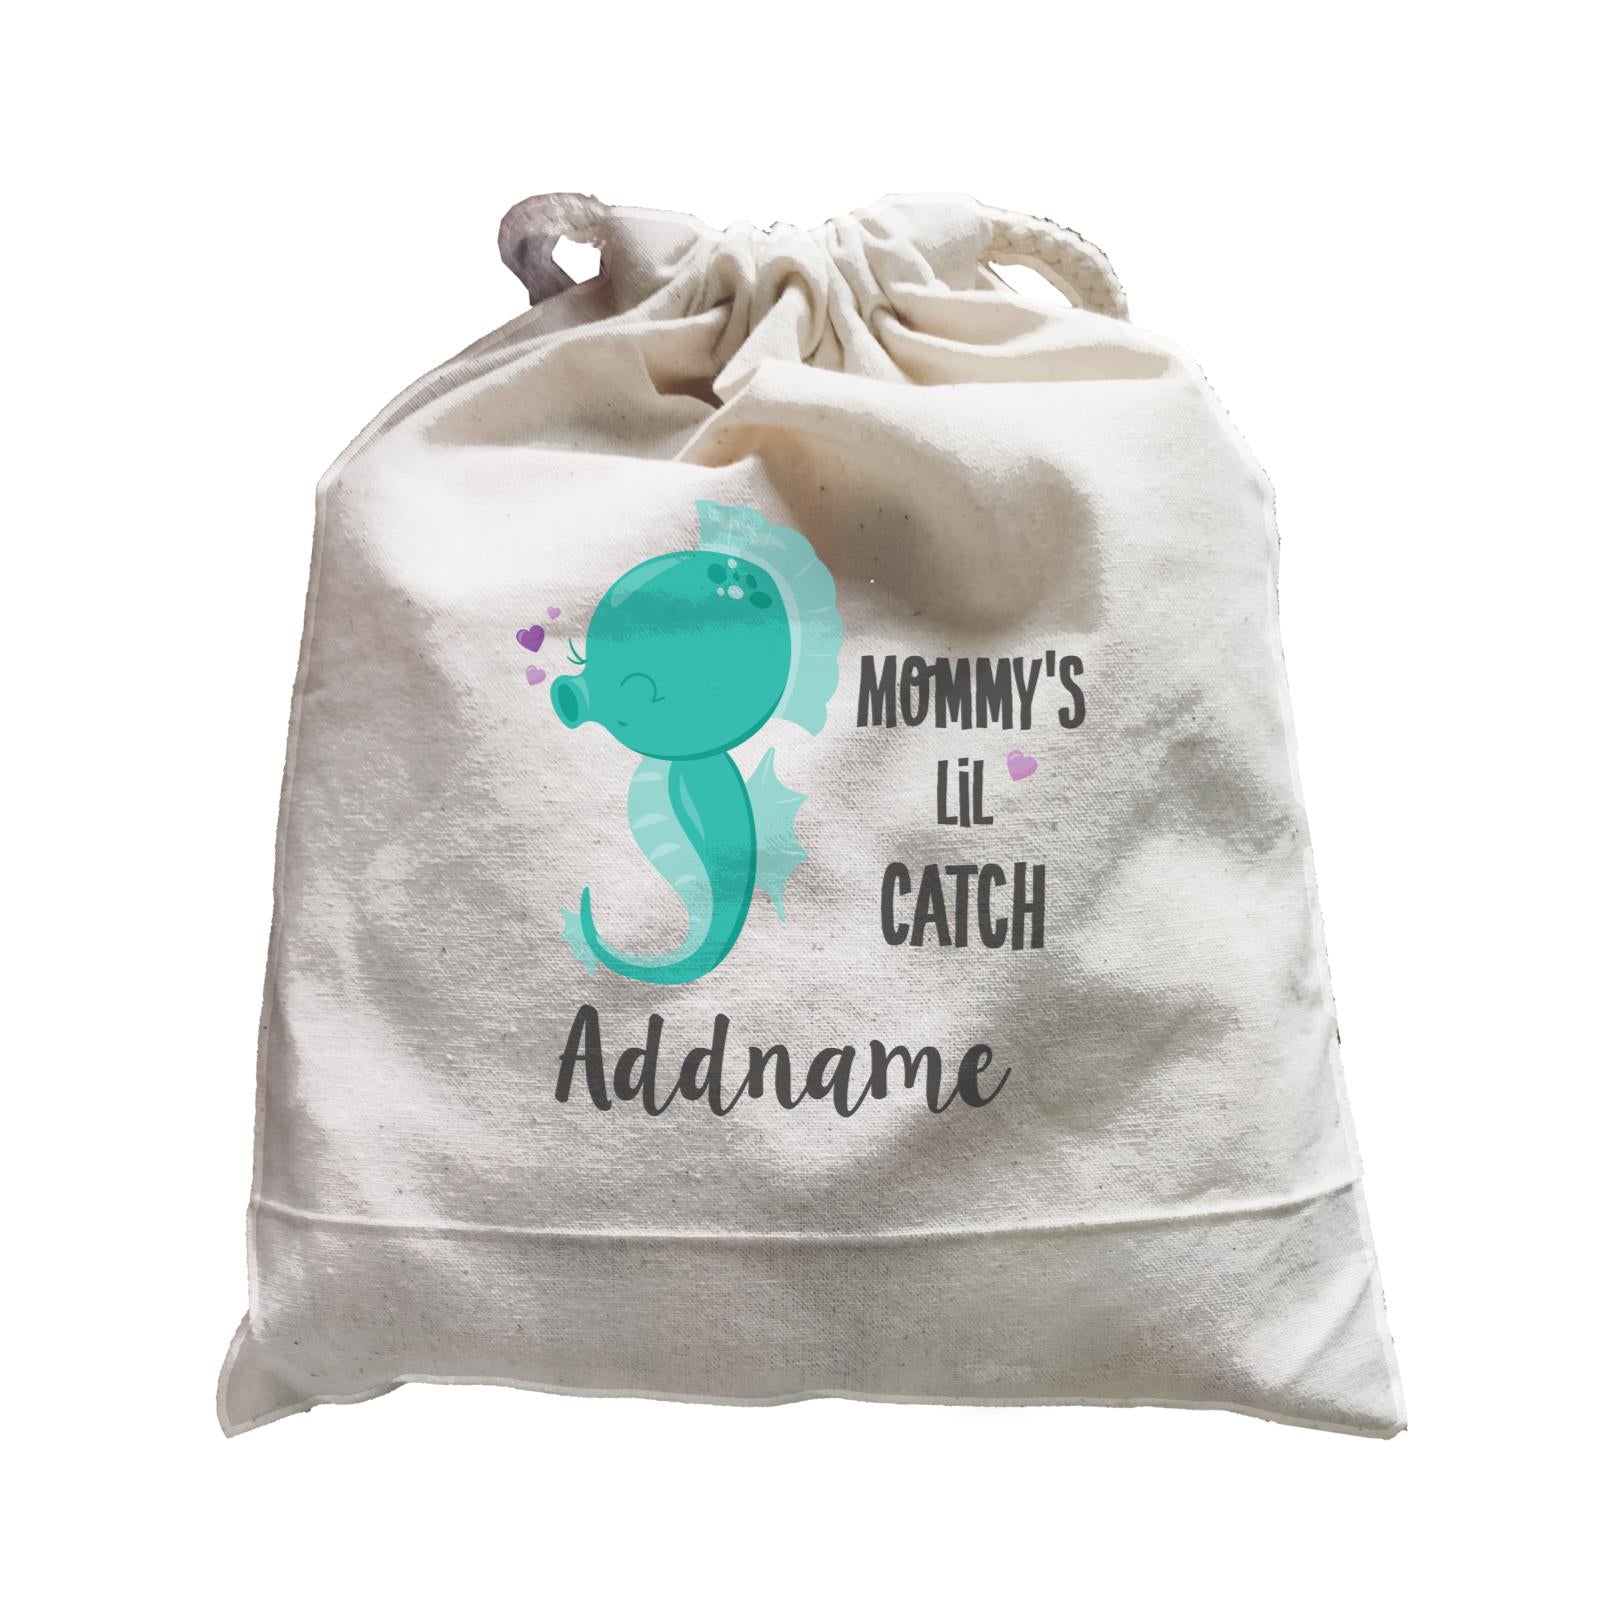 Cute Sea Animals Green Seahorse Mommy's Lil Catch Addname Satchel